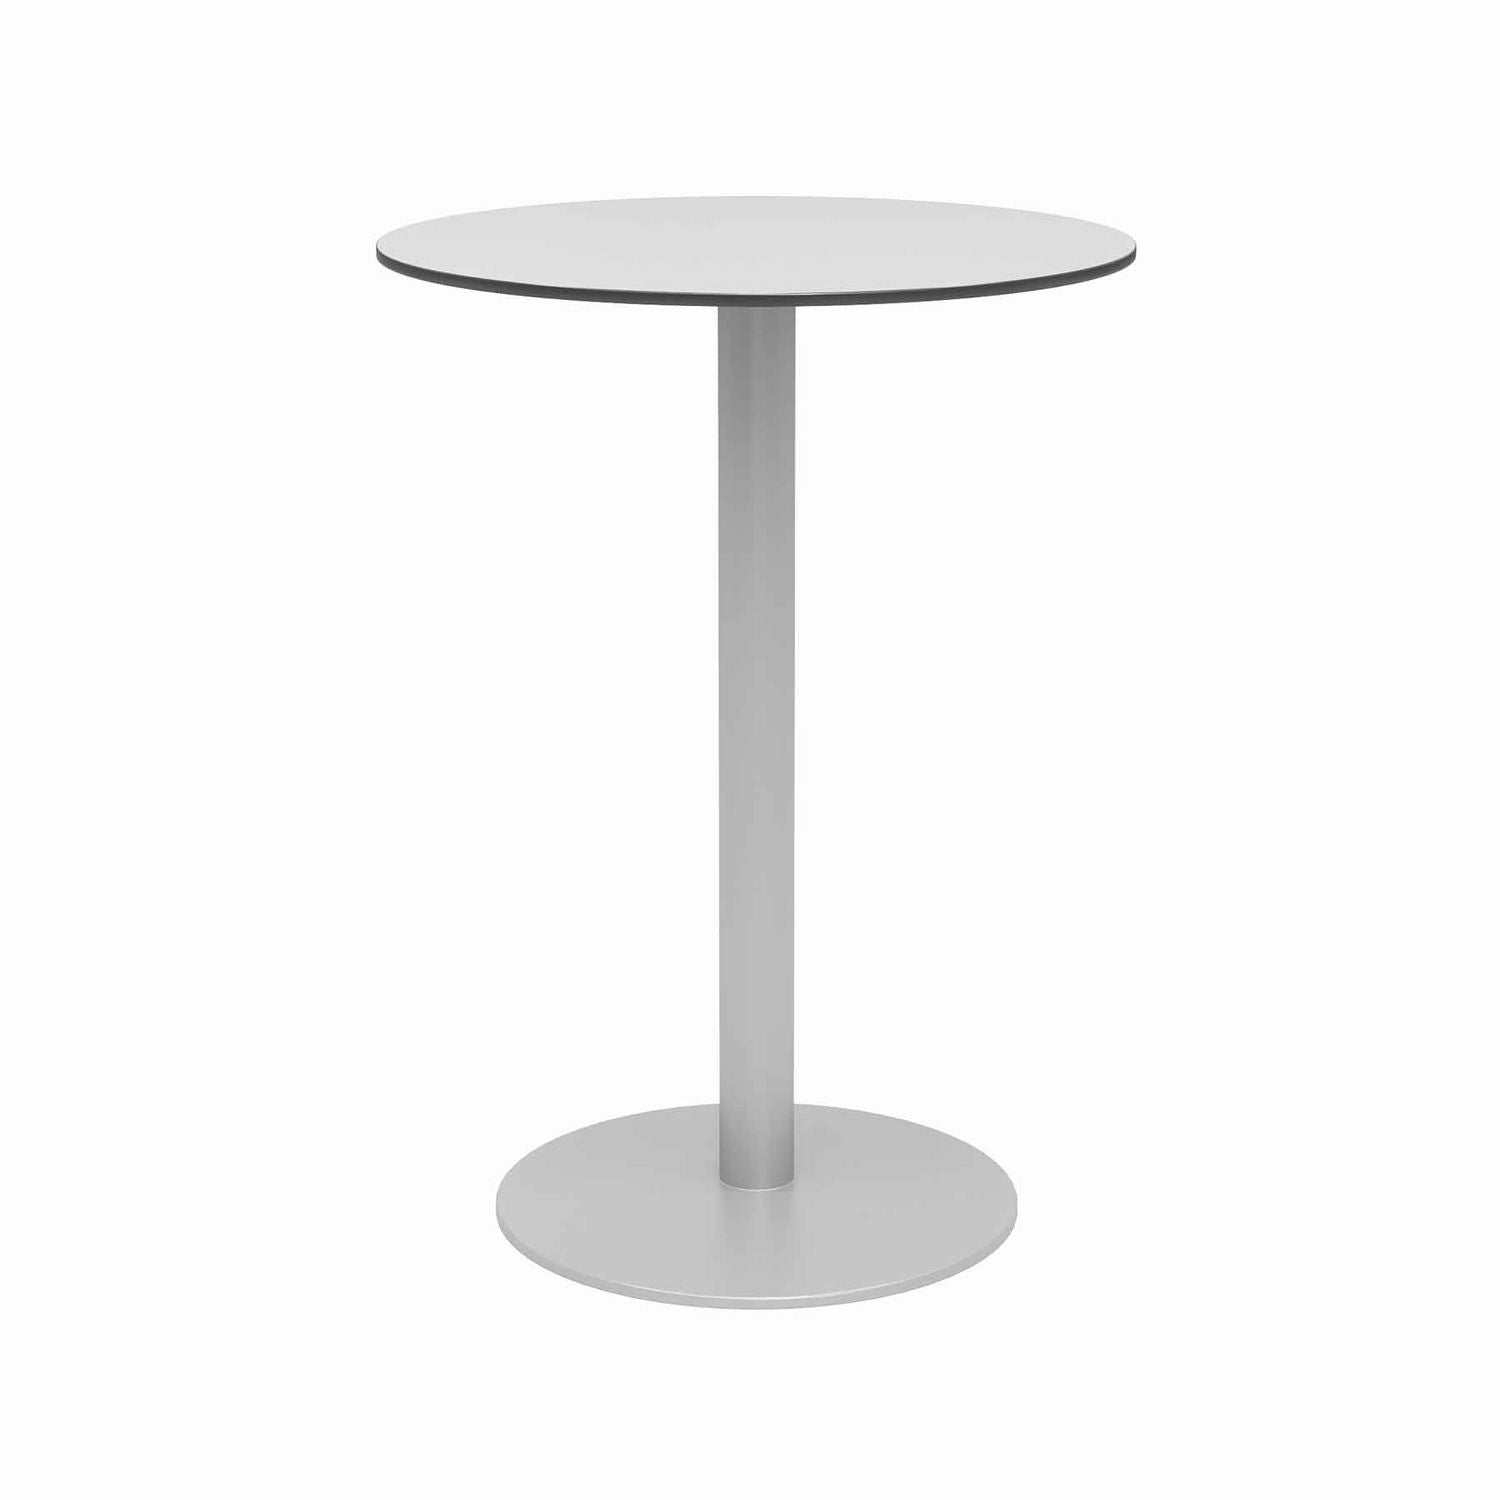 eveleen-outdoor-bistro-patio-table-2-mocha-powder-coated-polymer-barstools-round-30-dia-x-41h-grayships-in-4-6-bus-days_kfi840031918468 - 2